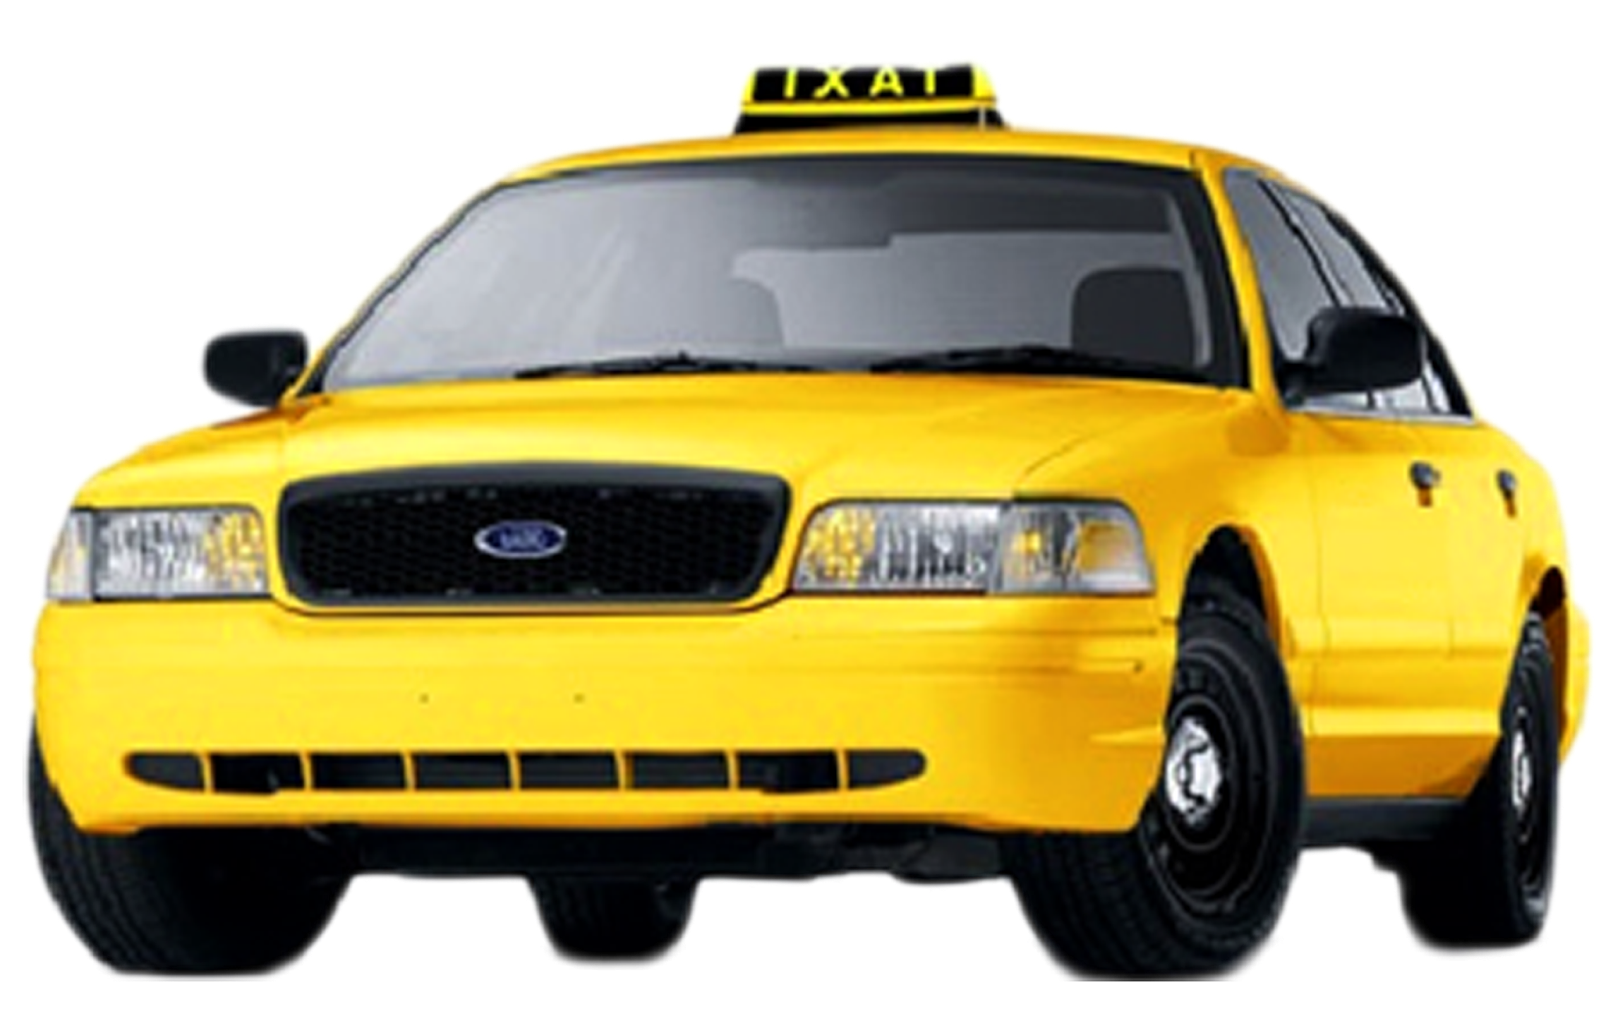 Taxi Cab Png Image PNG Image